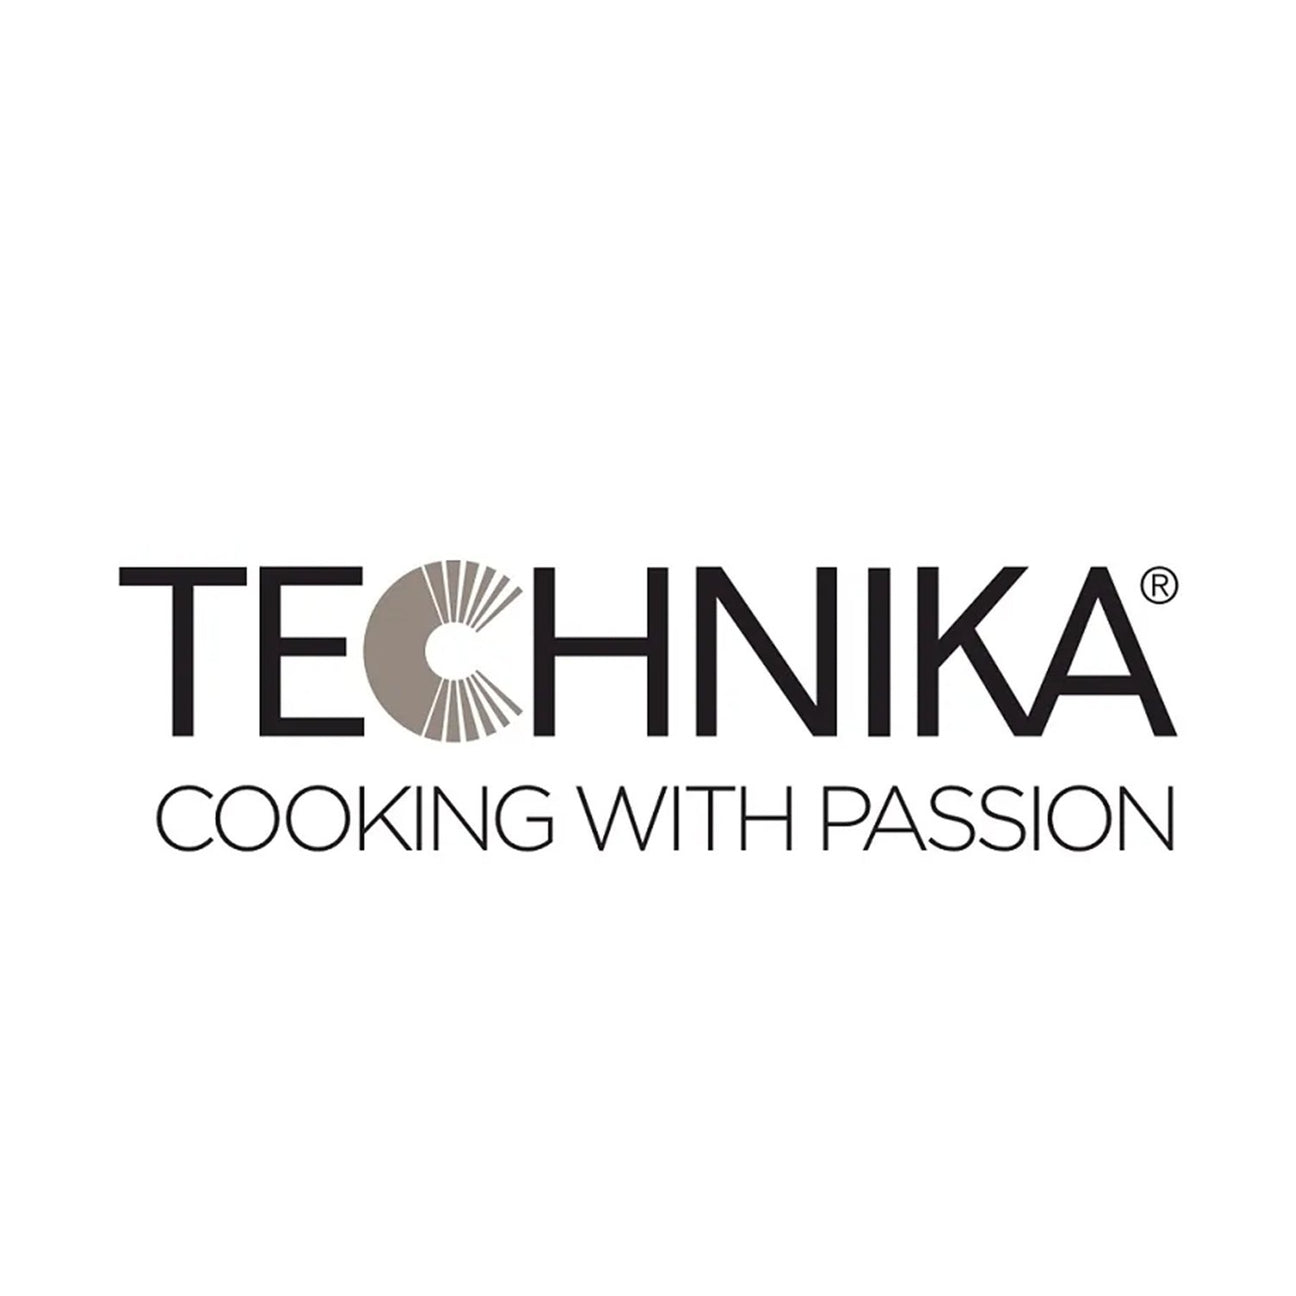 Technika Cooktop & Oven Parts - My Oven Spares